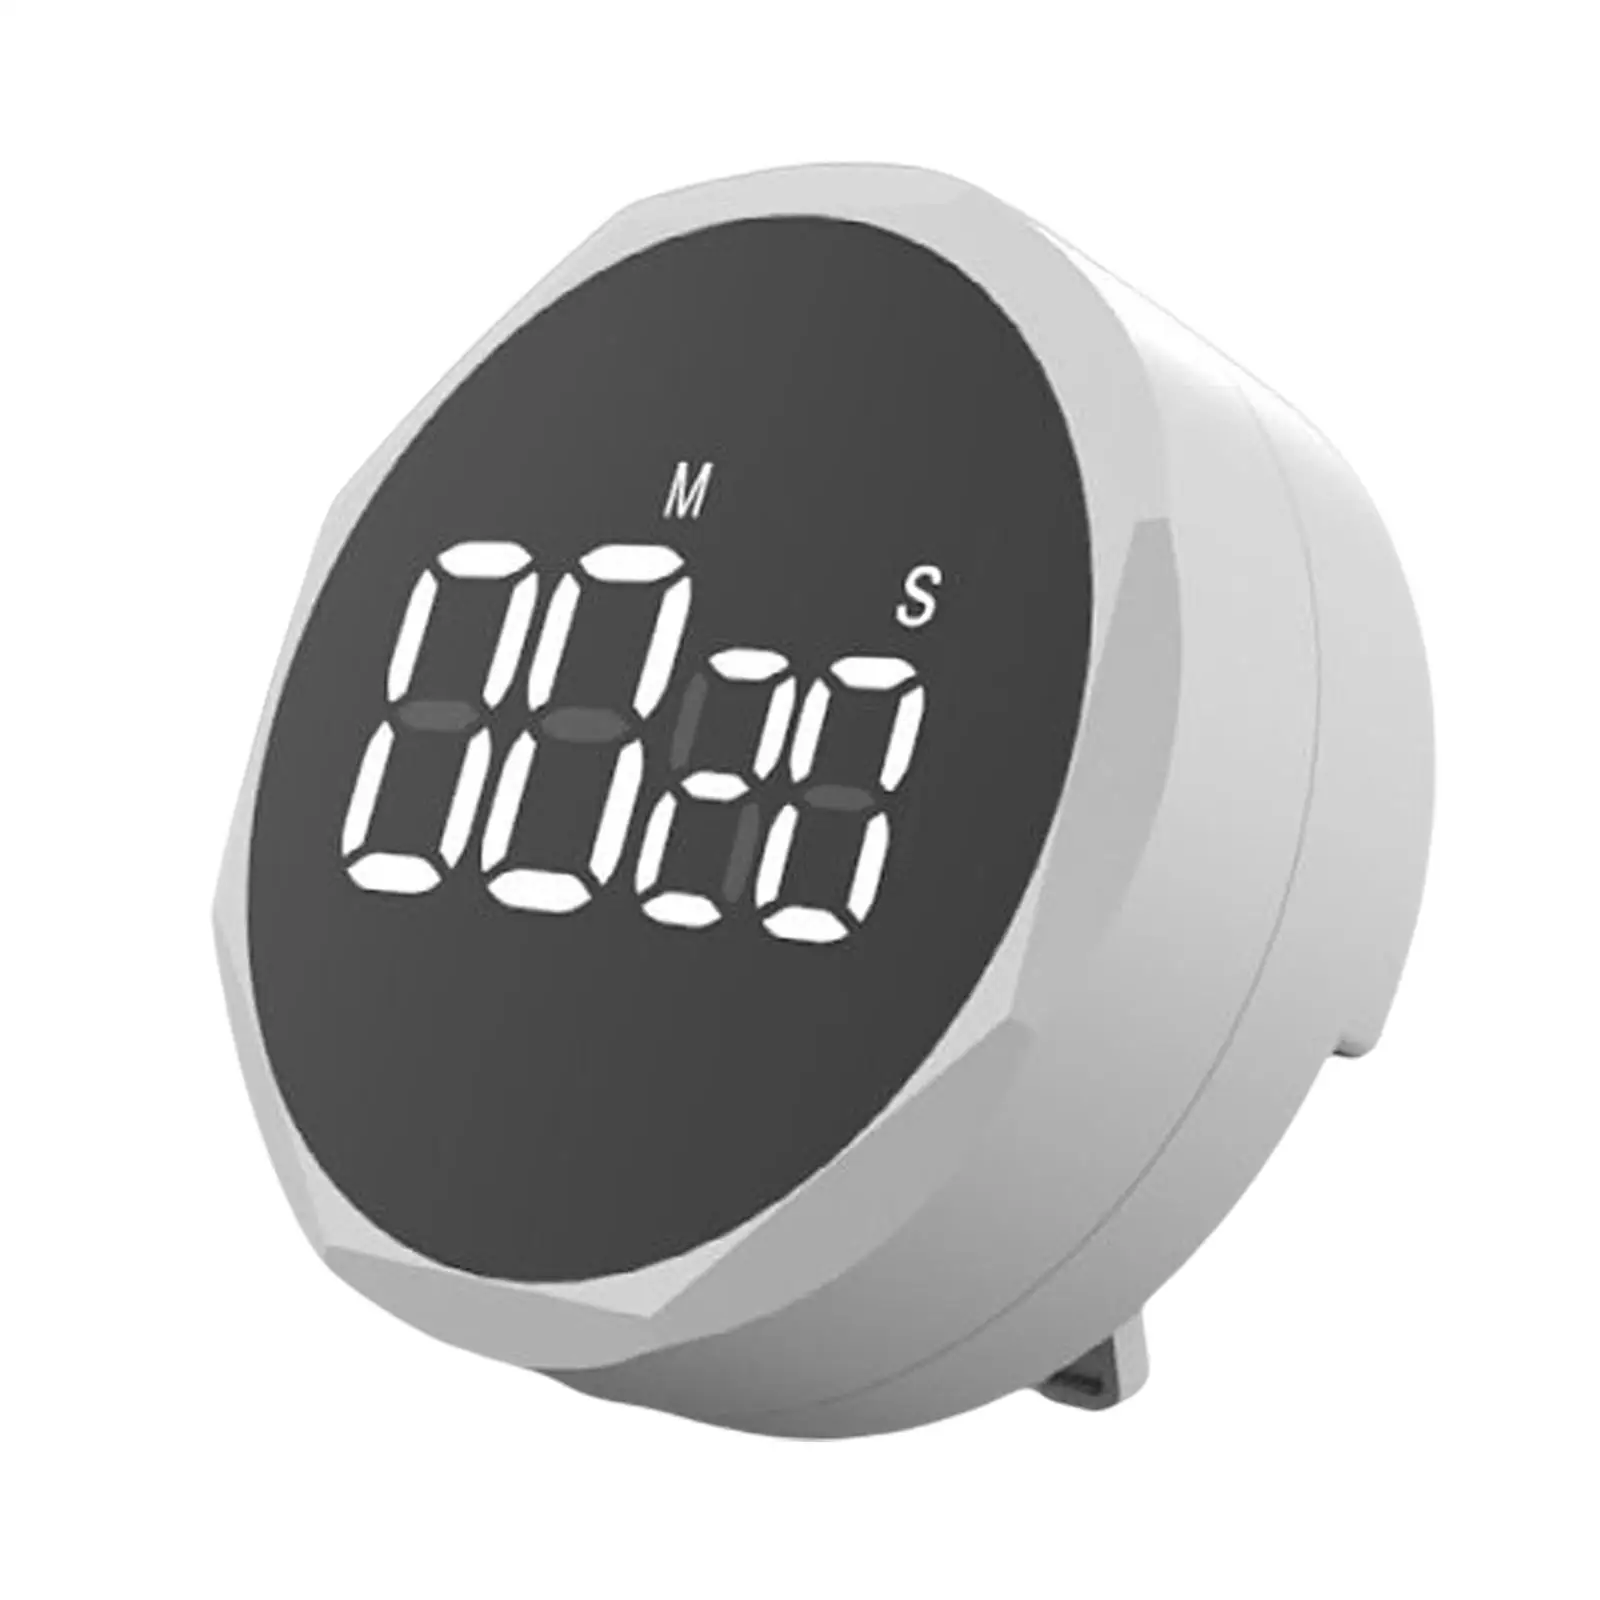 Digital Reminder Timer Adjustable Reminder LCD Display Motion timers Stopwatch for Barbecue Meetings Gaming Fitness Adults Kids